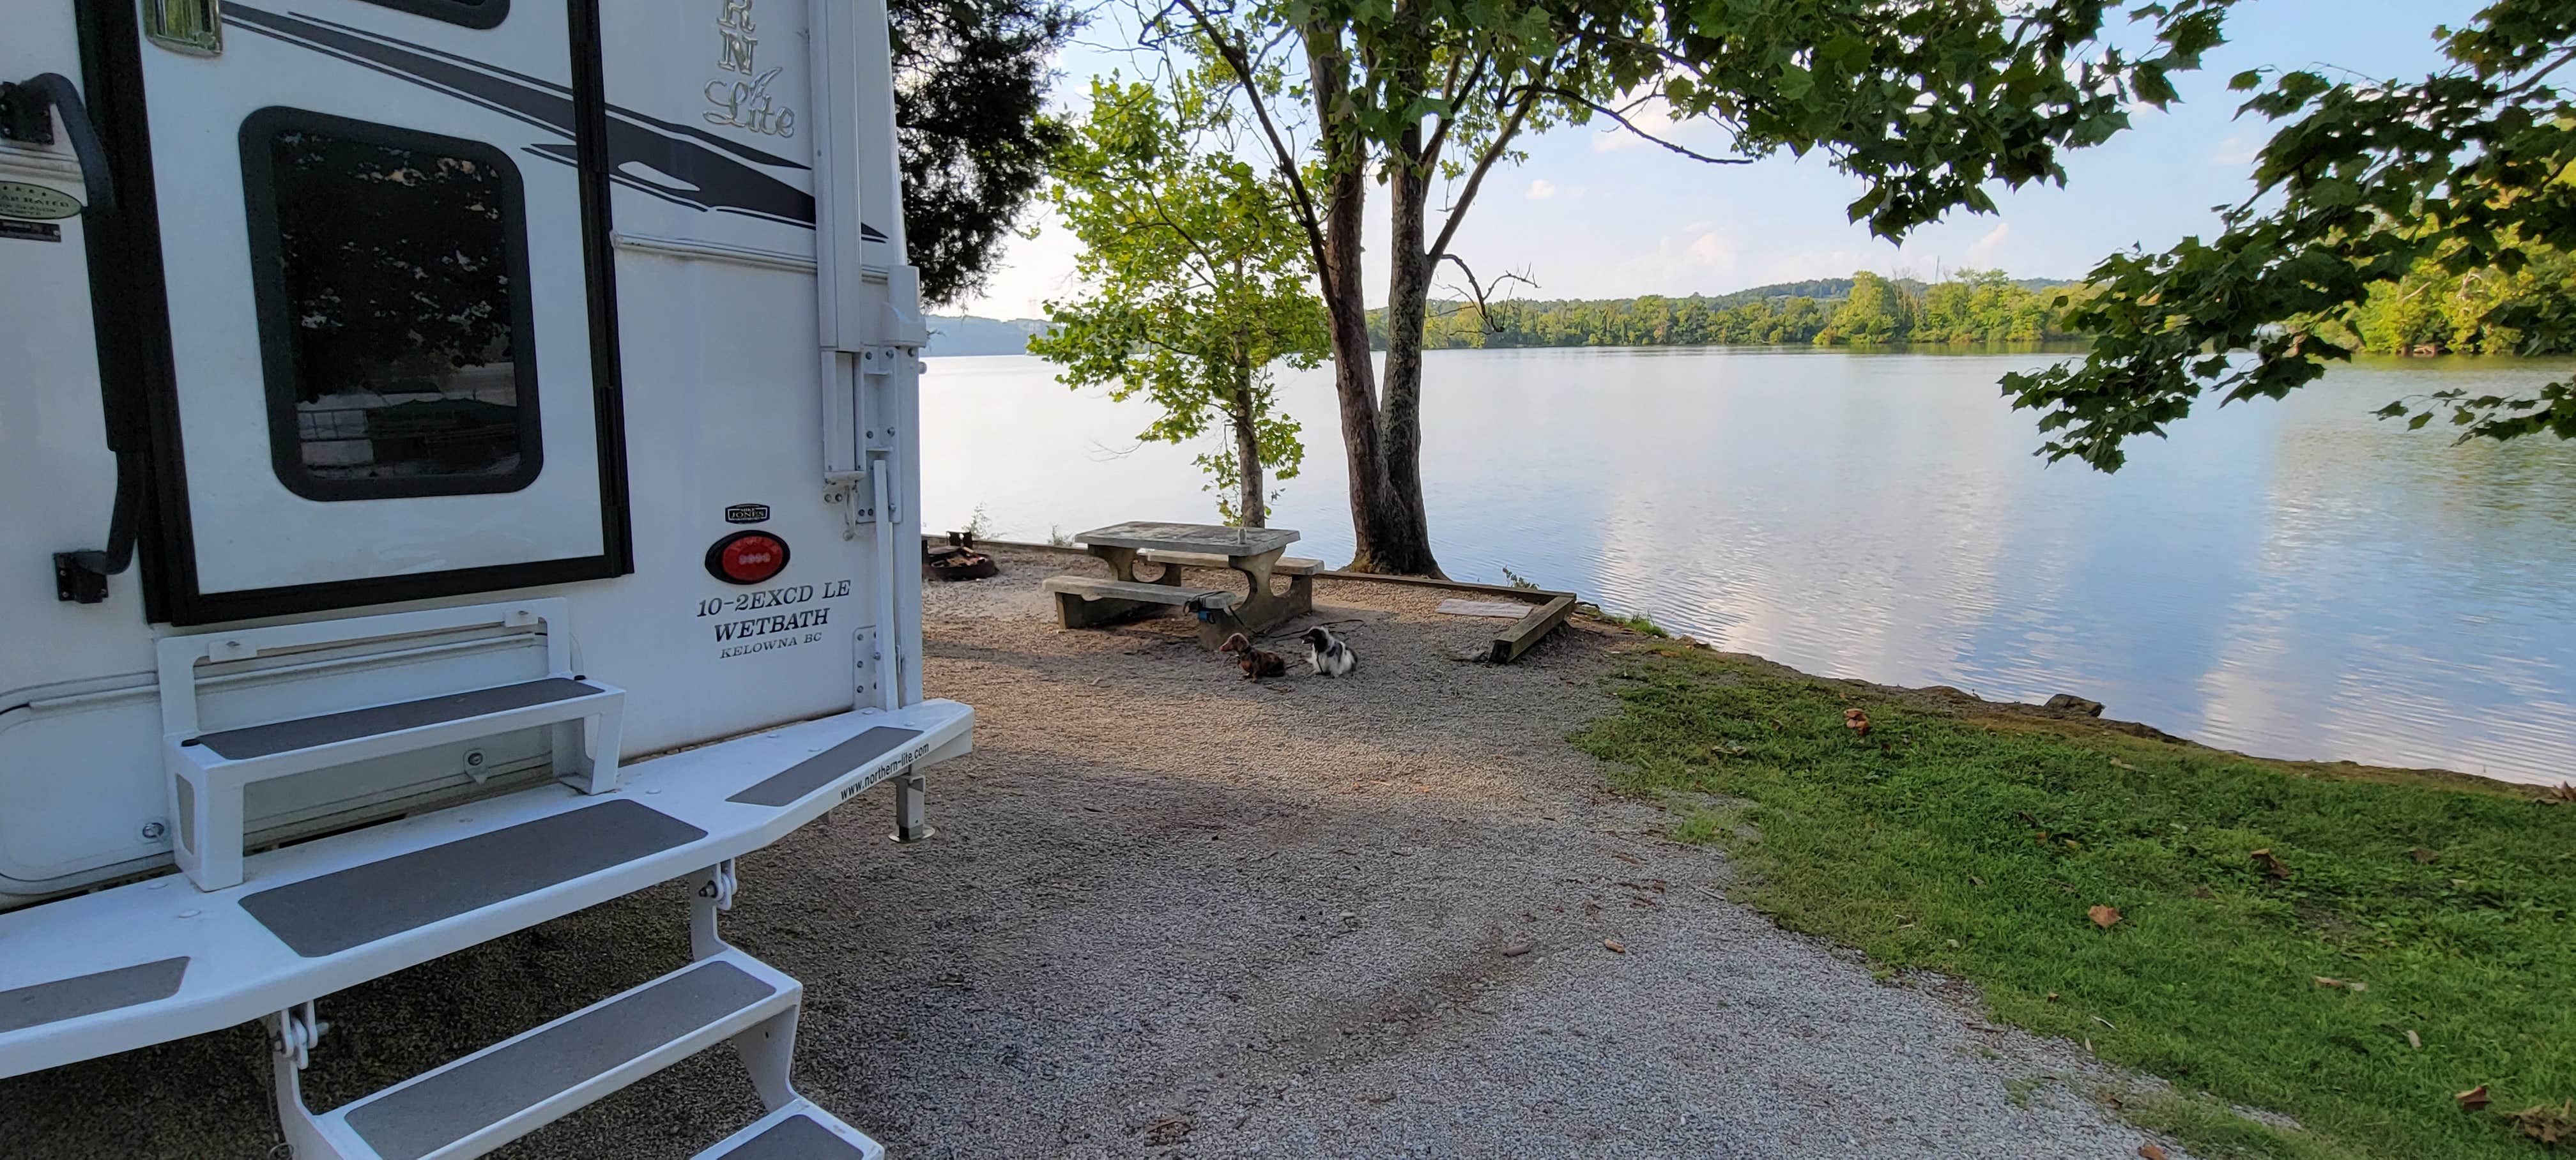 Camper submitted image from Riley Creek - 2